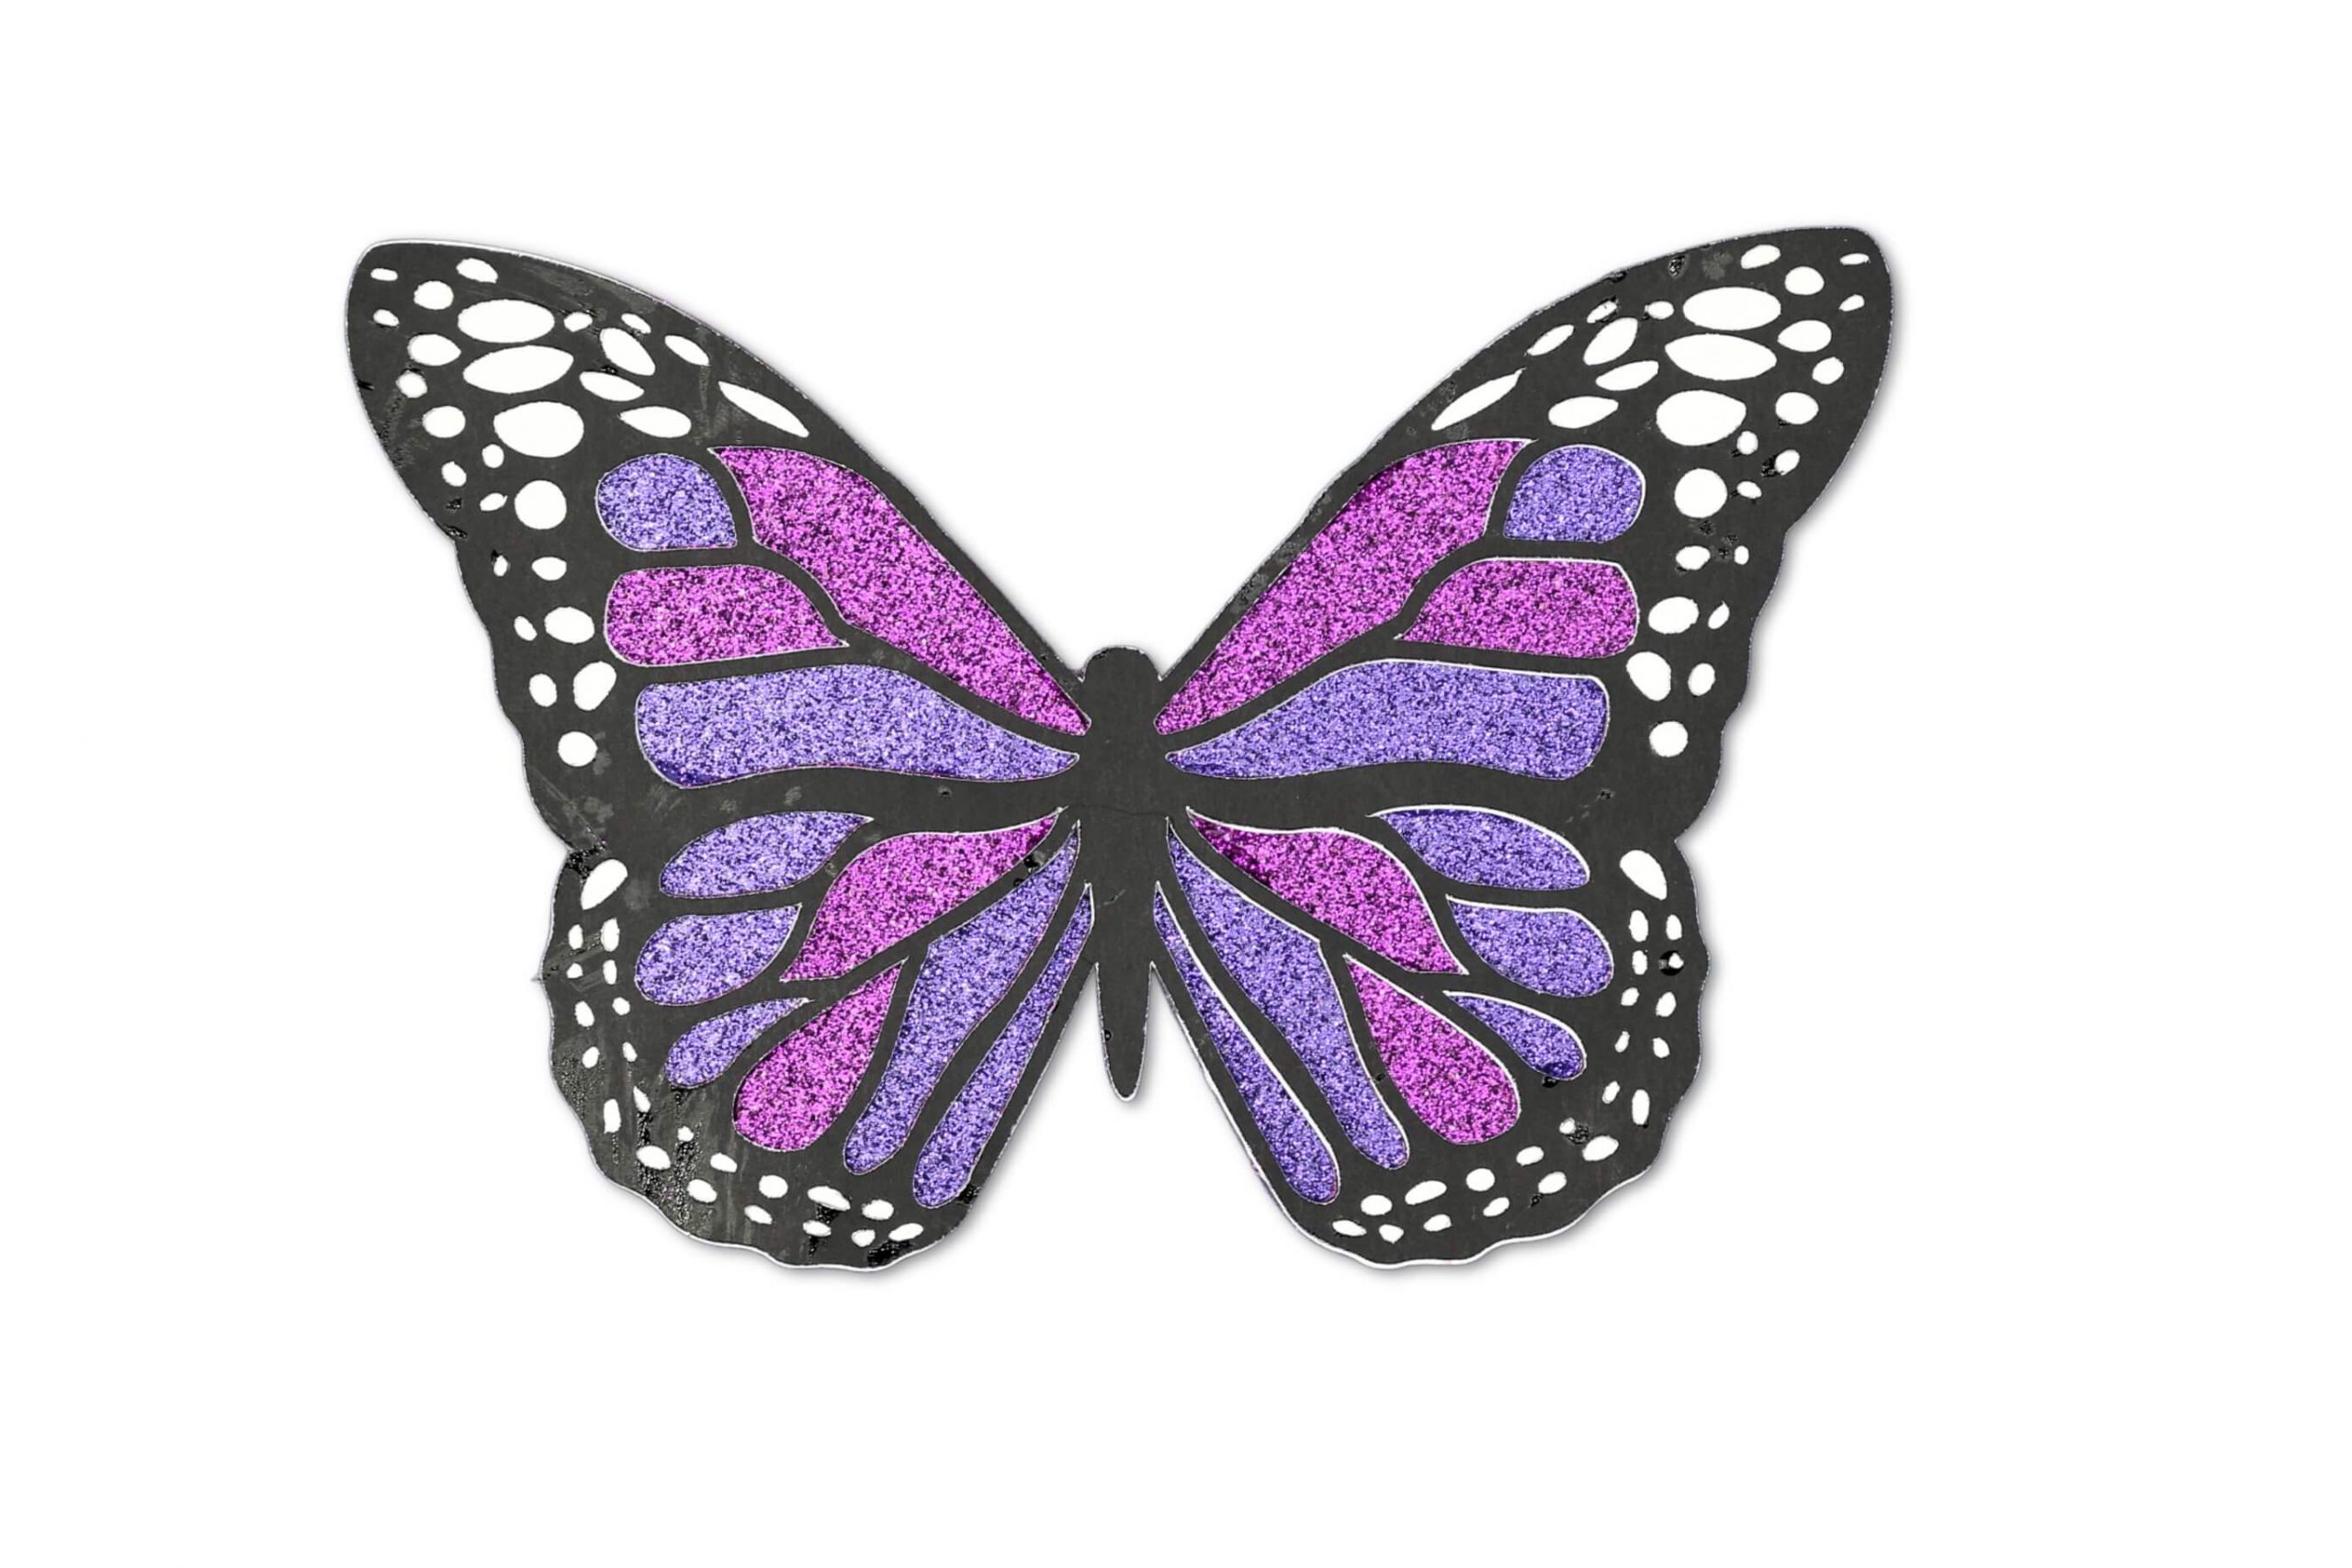 Pretty Butterfly Crafts To Make Using Glitter For Home Decor Beautiful Glitter Paper Butterfly Crafts